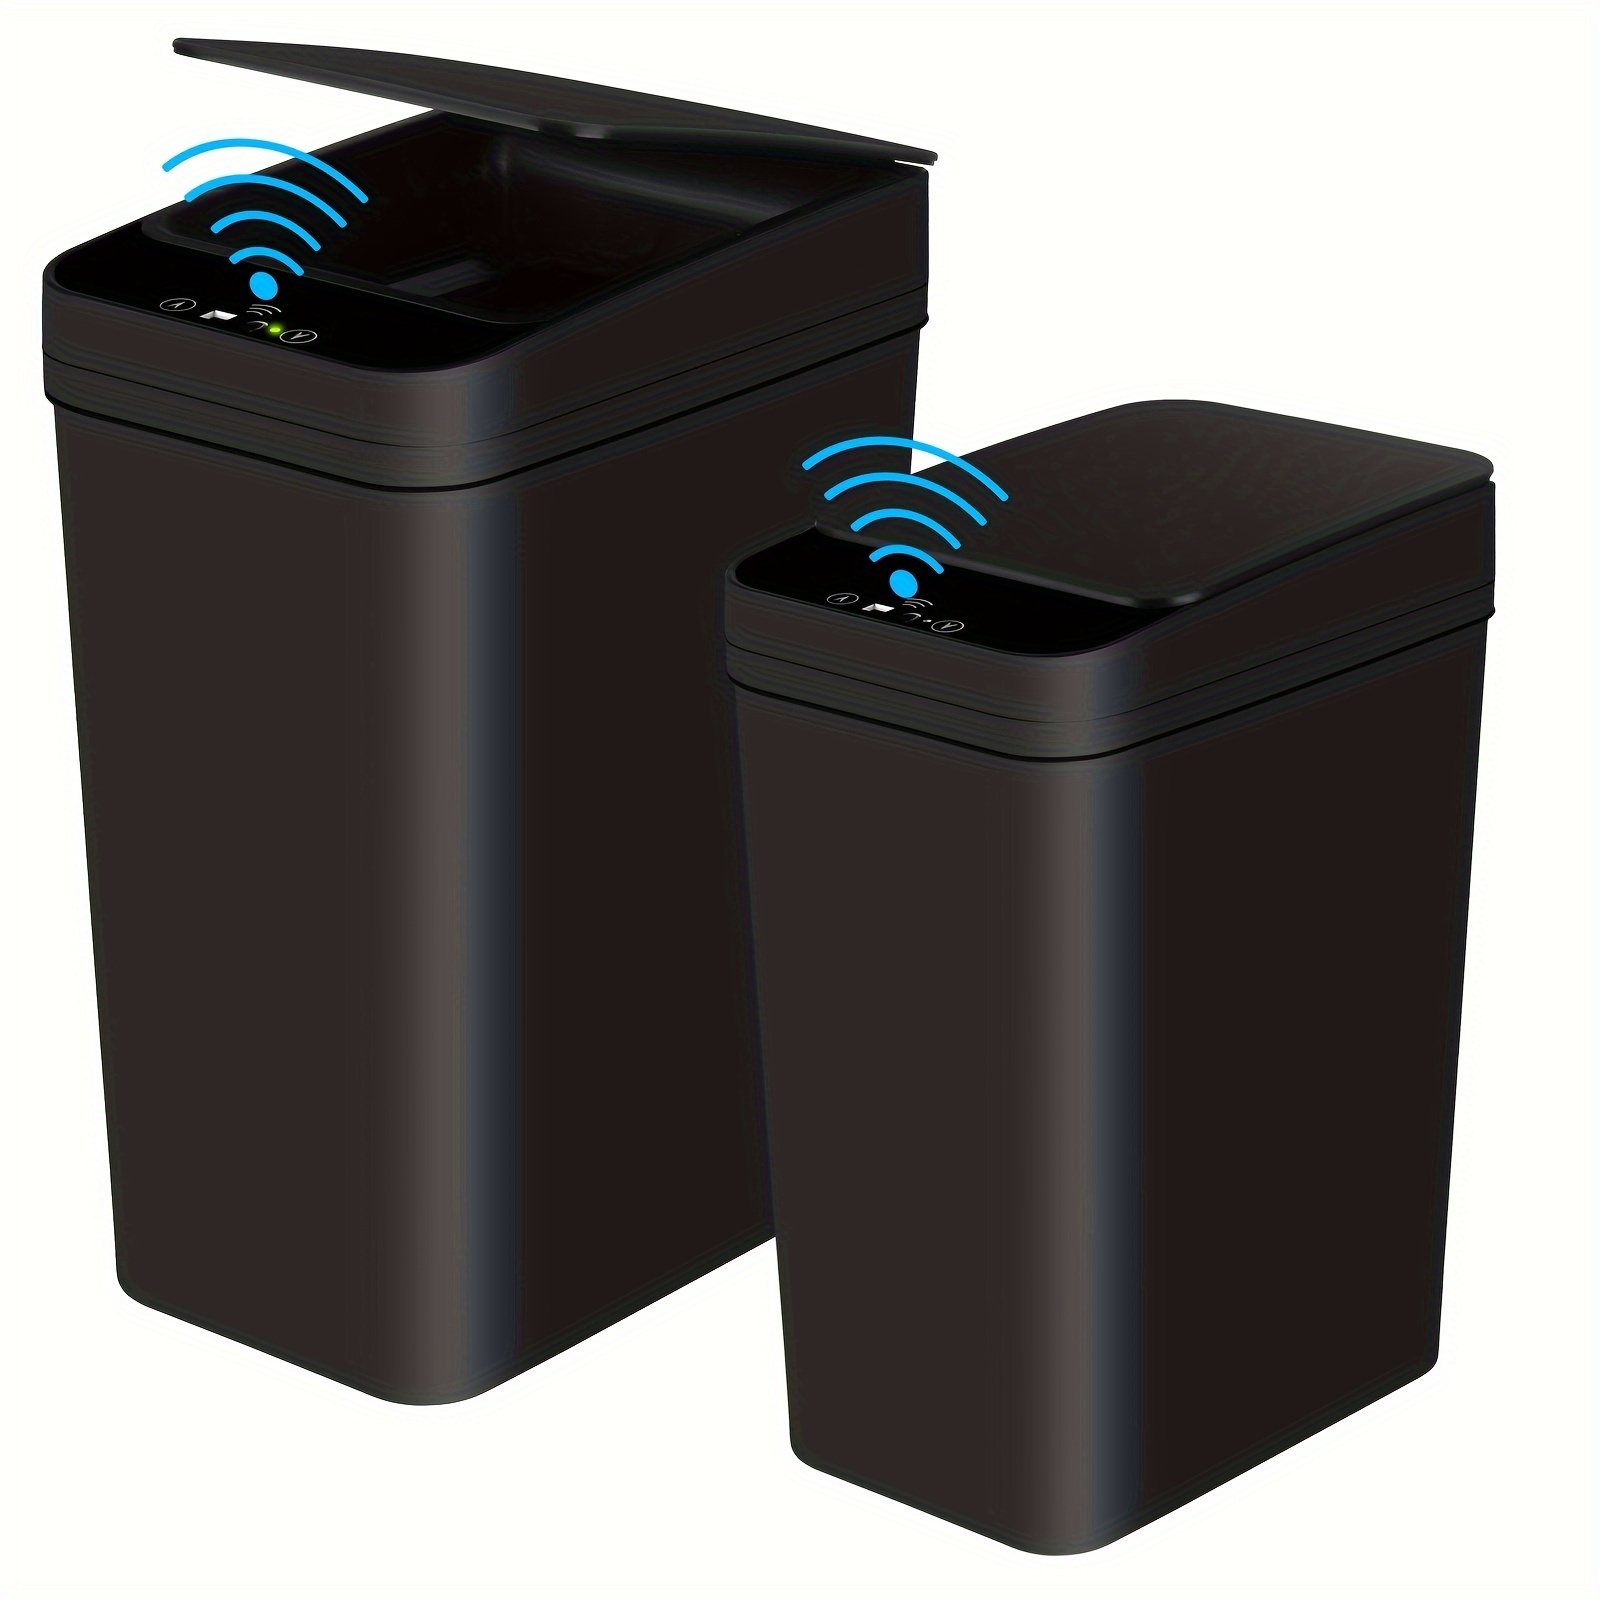 

2 Pack 2.2 Gal & 4 Gal Bathroom Automatic Trash Can Touchless Motion Sensor Small Garbage Can With Lid Smart Electric Narrow Waterproof Garbage Bin For Bedroom Office Kitchen (black)